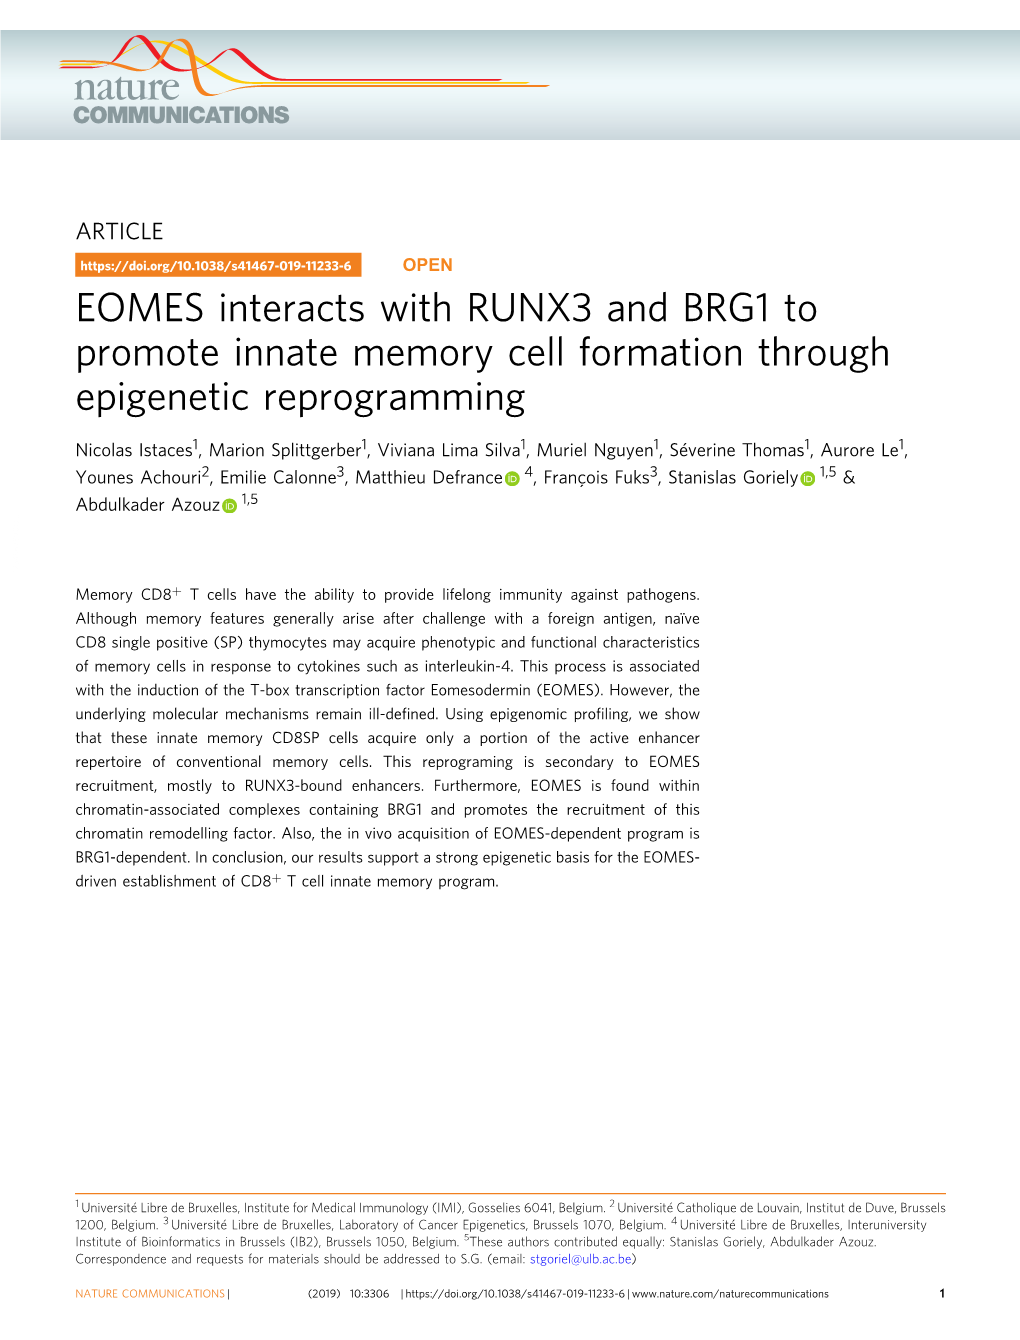 EOMES Interacts with RUNX3 and BRG1 to Promote Innate Memory Cell Formation Through Epigenetic Reprogramming